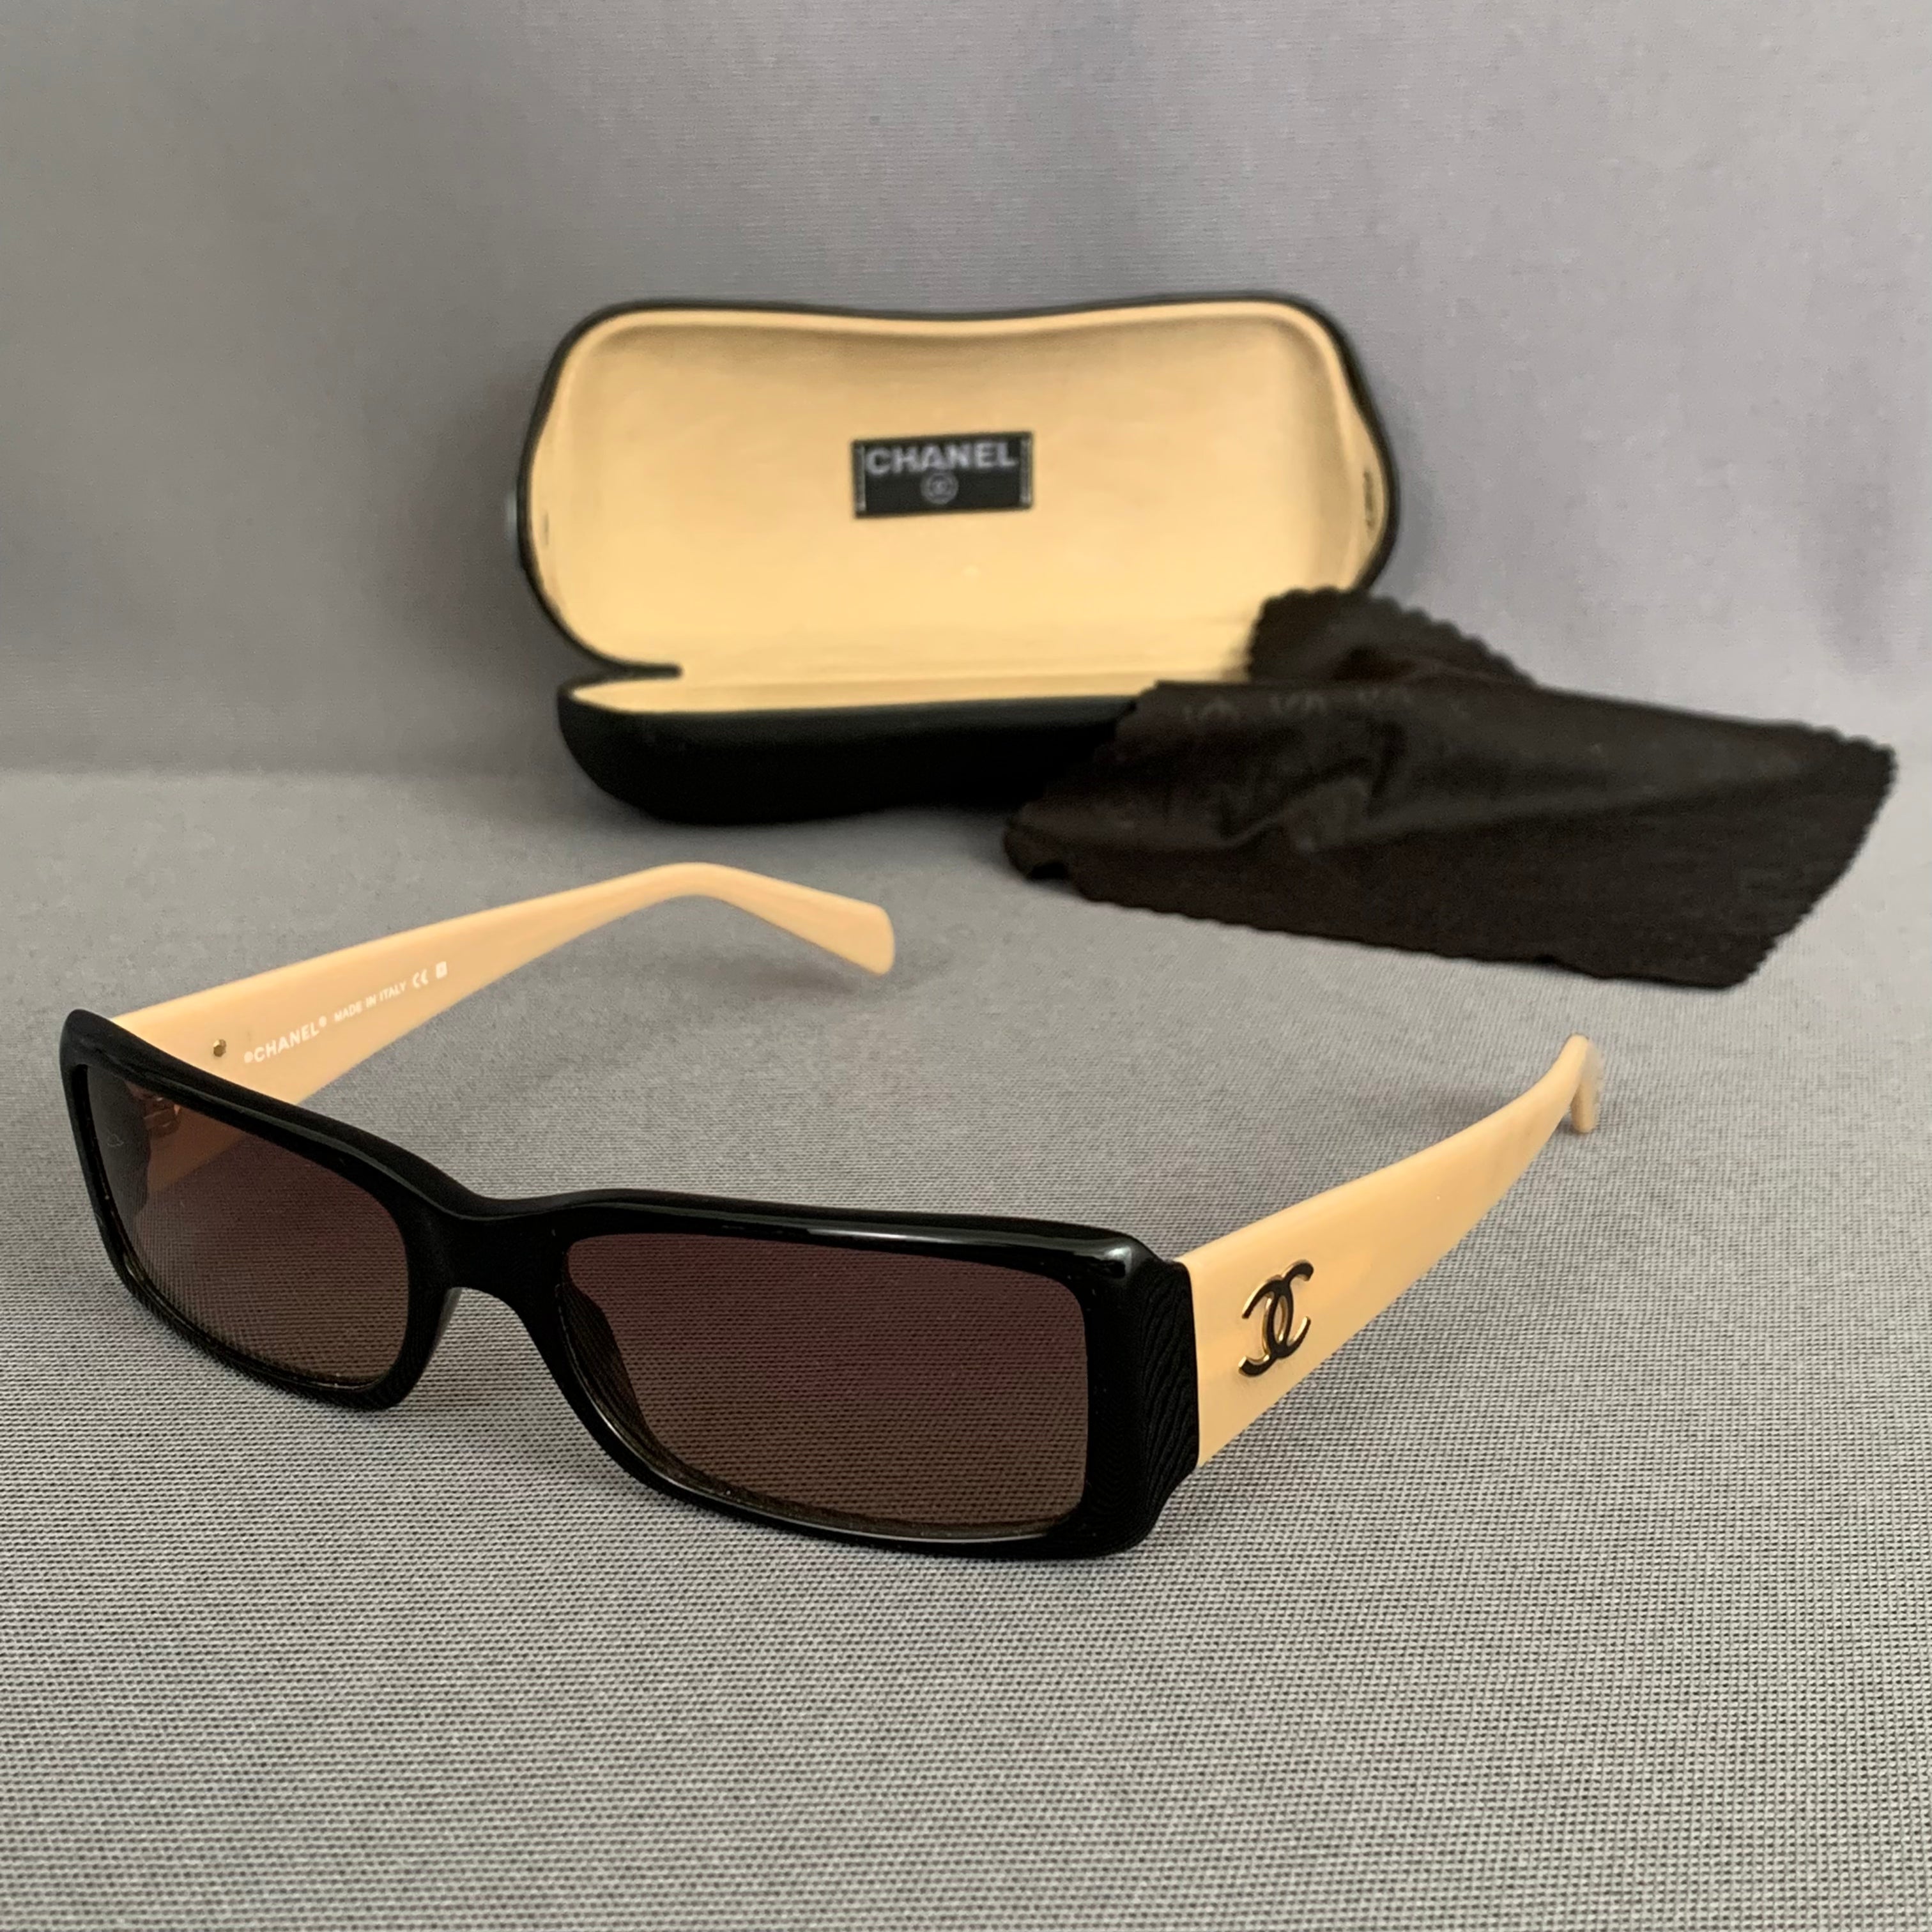 CHANEL SUNGLASSES with Case & Cloth - Made in Italy - 5078 c.817/13 54 –  fairytale-romance.co.uk